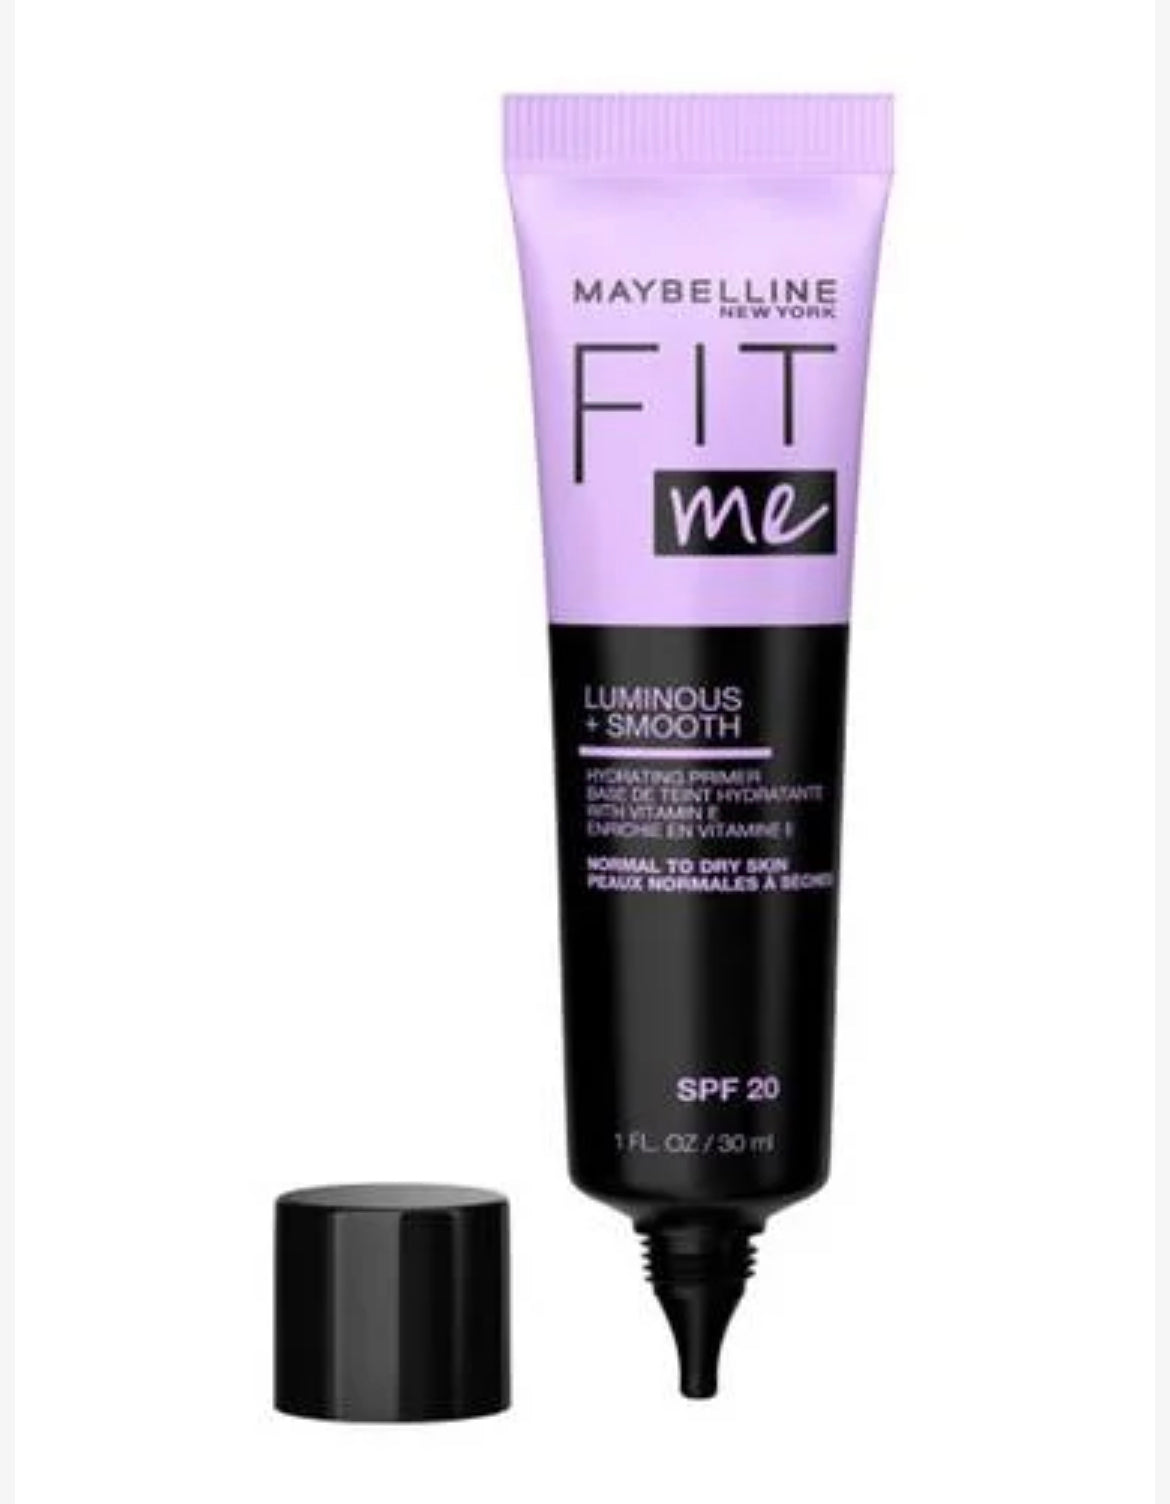 Maybelline Fit Me Luminous & Smooth Primer